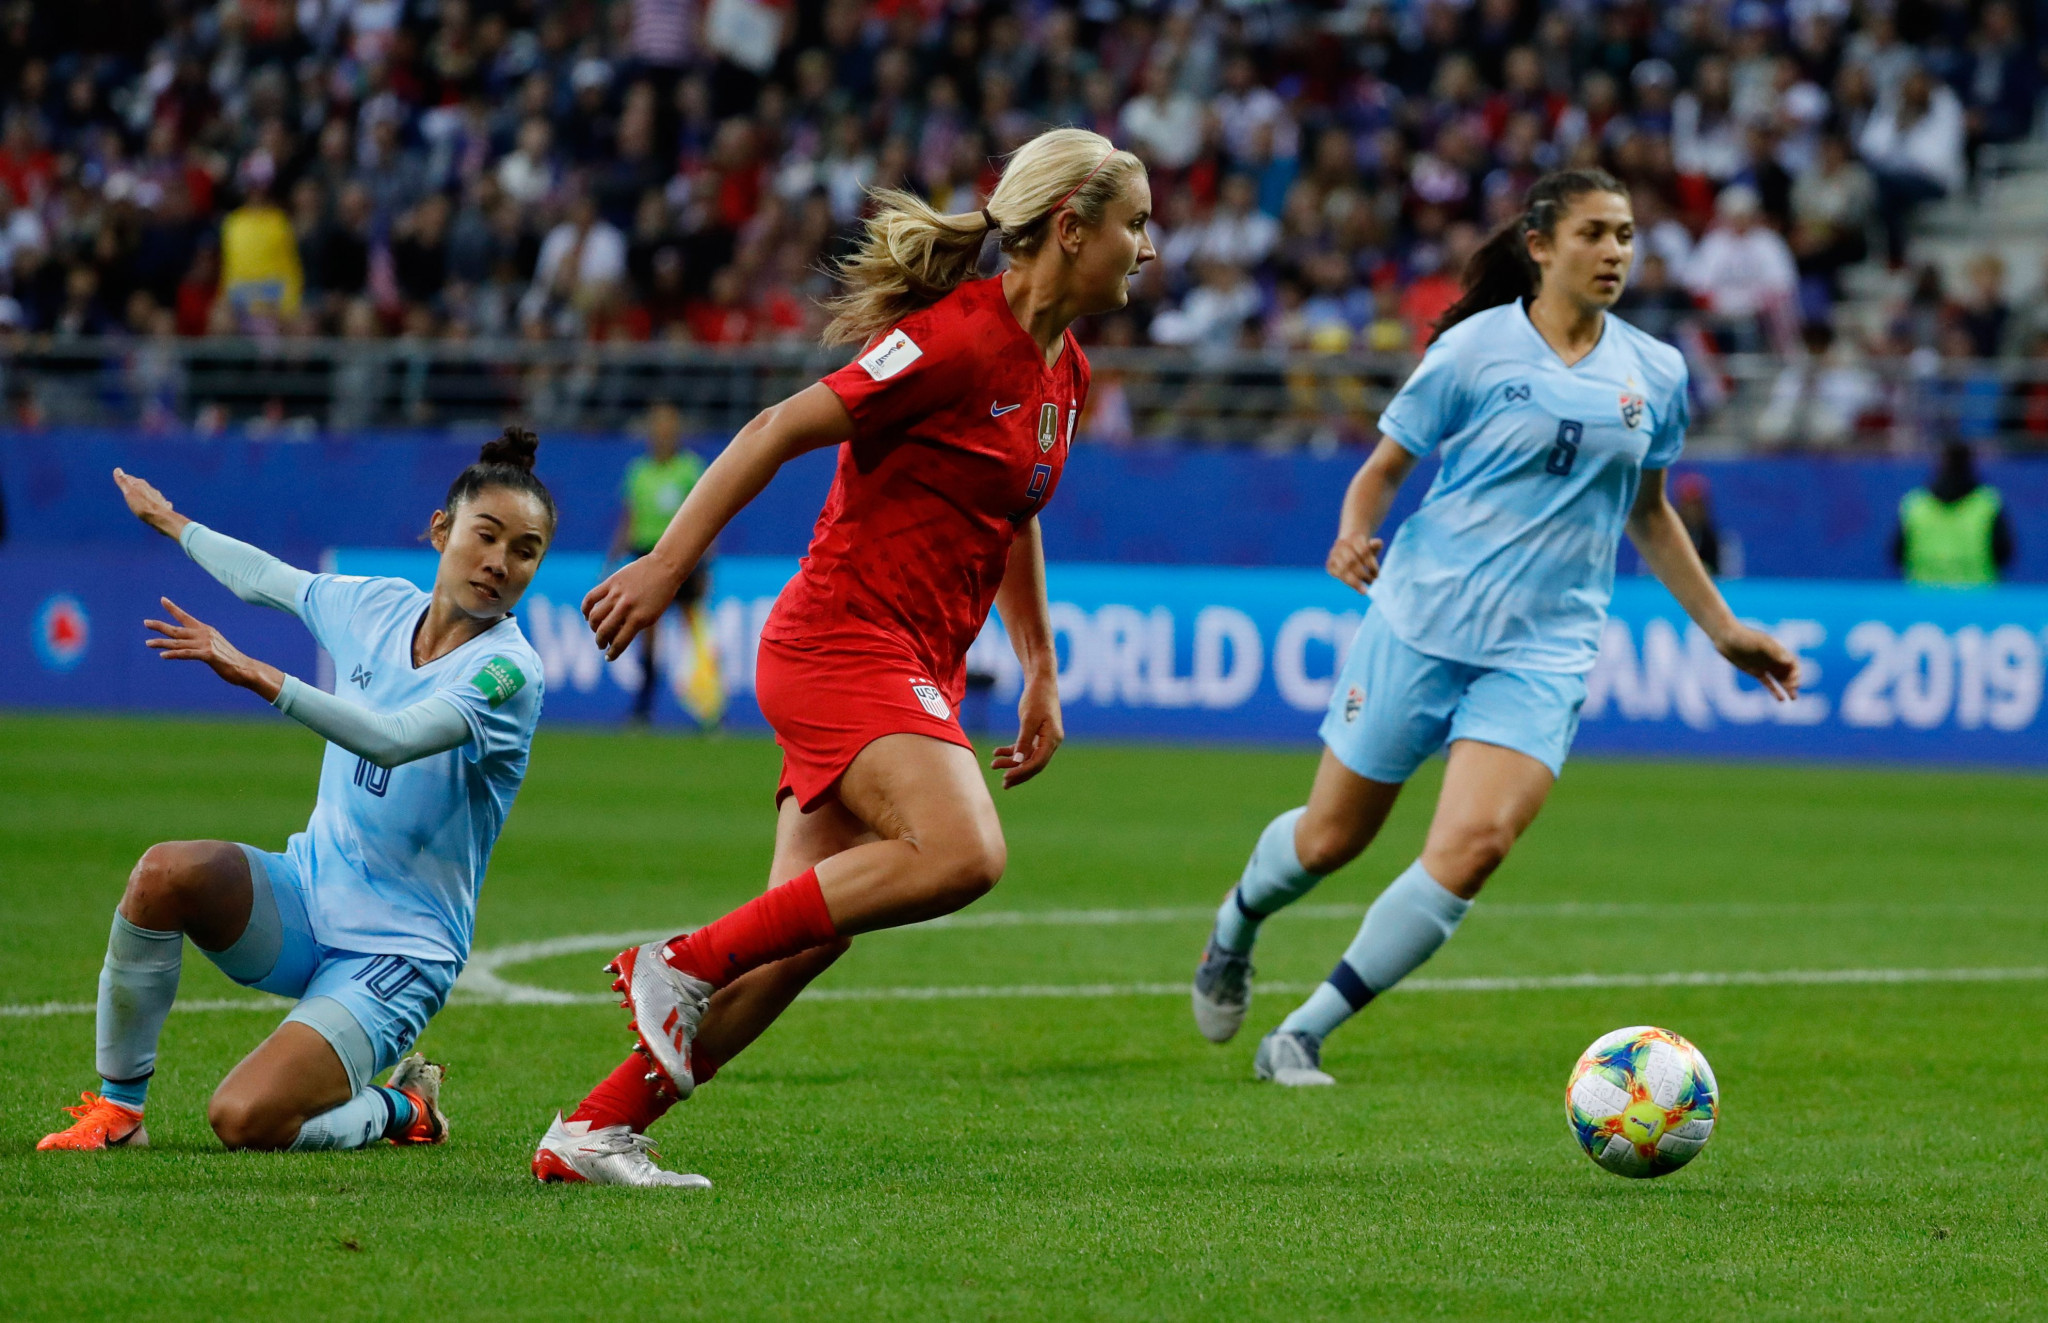 The United States 13-0 annihilation of Thailand at the 2019 FIFA Women's World Cup in France showed the gulf in quality between some of the teams competing ©Getty Images